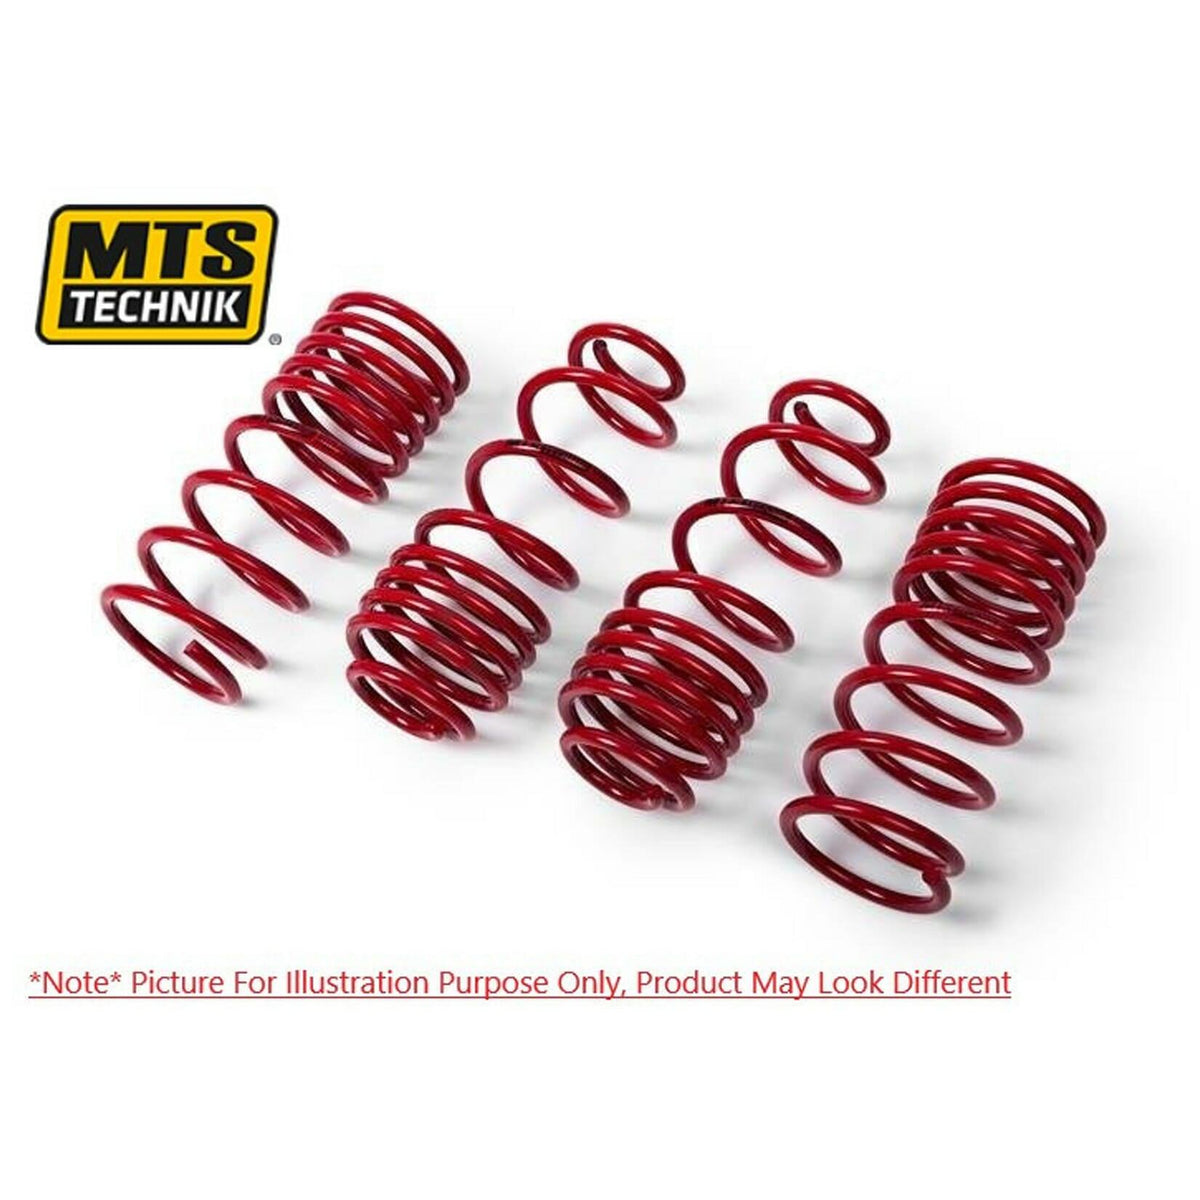 VOLKSWAGEN CADDY MK5 2021 + - MTS LOWERING SPRINGS - FRONT 55mm REAR 75mm - Storm Xccessories2